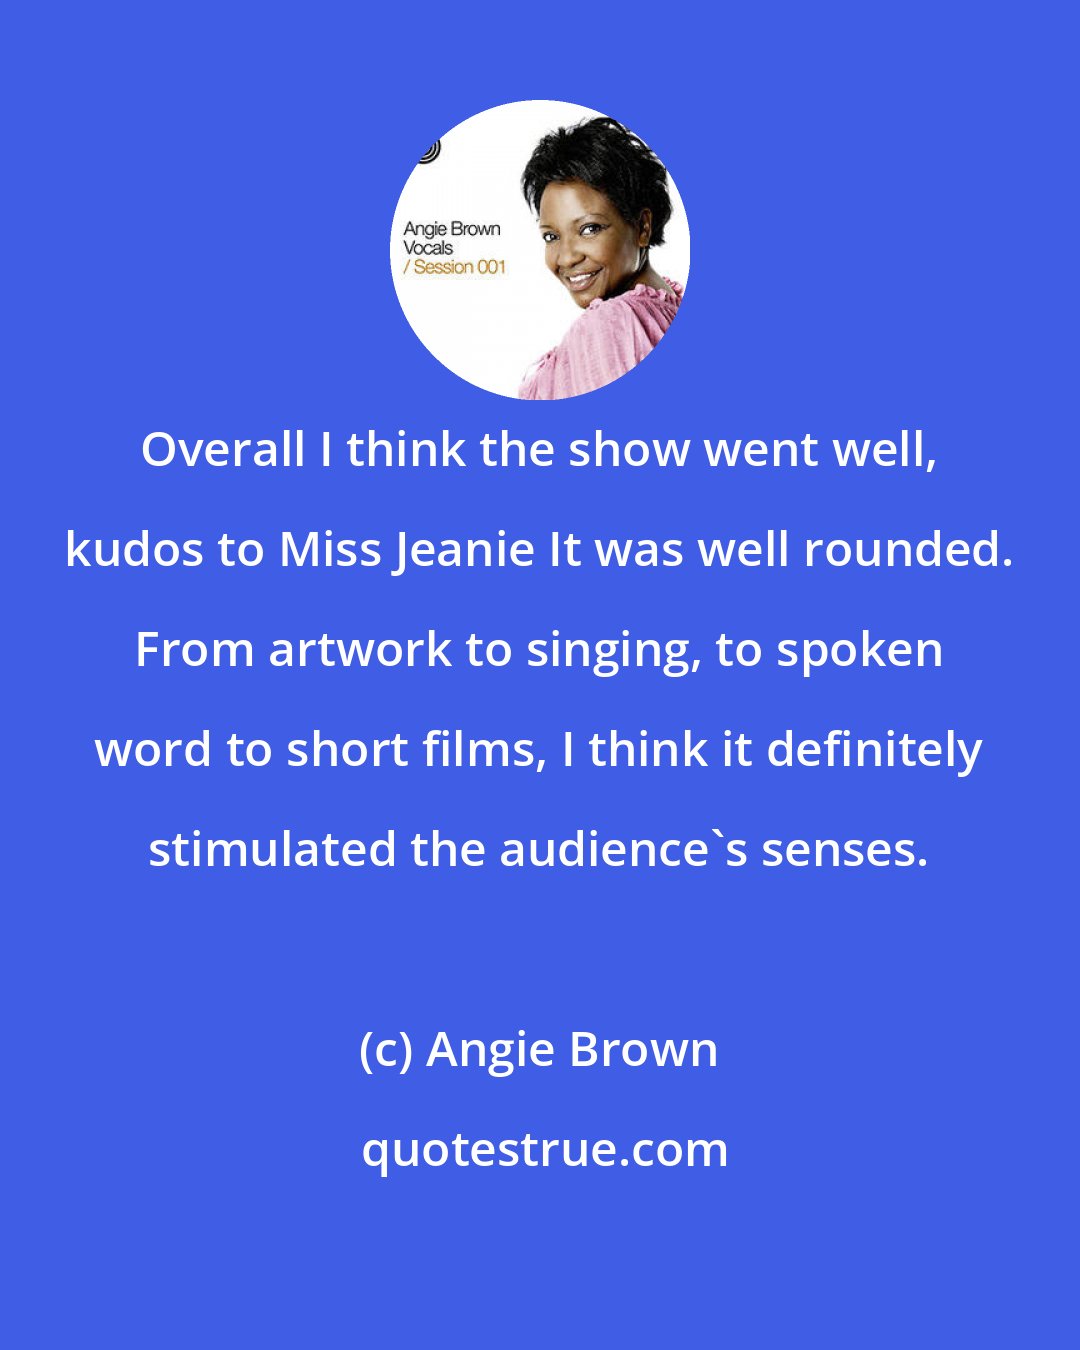 Angie Brown: Overall I think the show went well, kudos to Miss Jeanie It was well rounded. From artwork to singing, to spoken word to short films, I think it definitely stimulated the audience's senses.